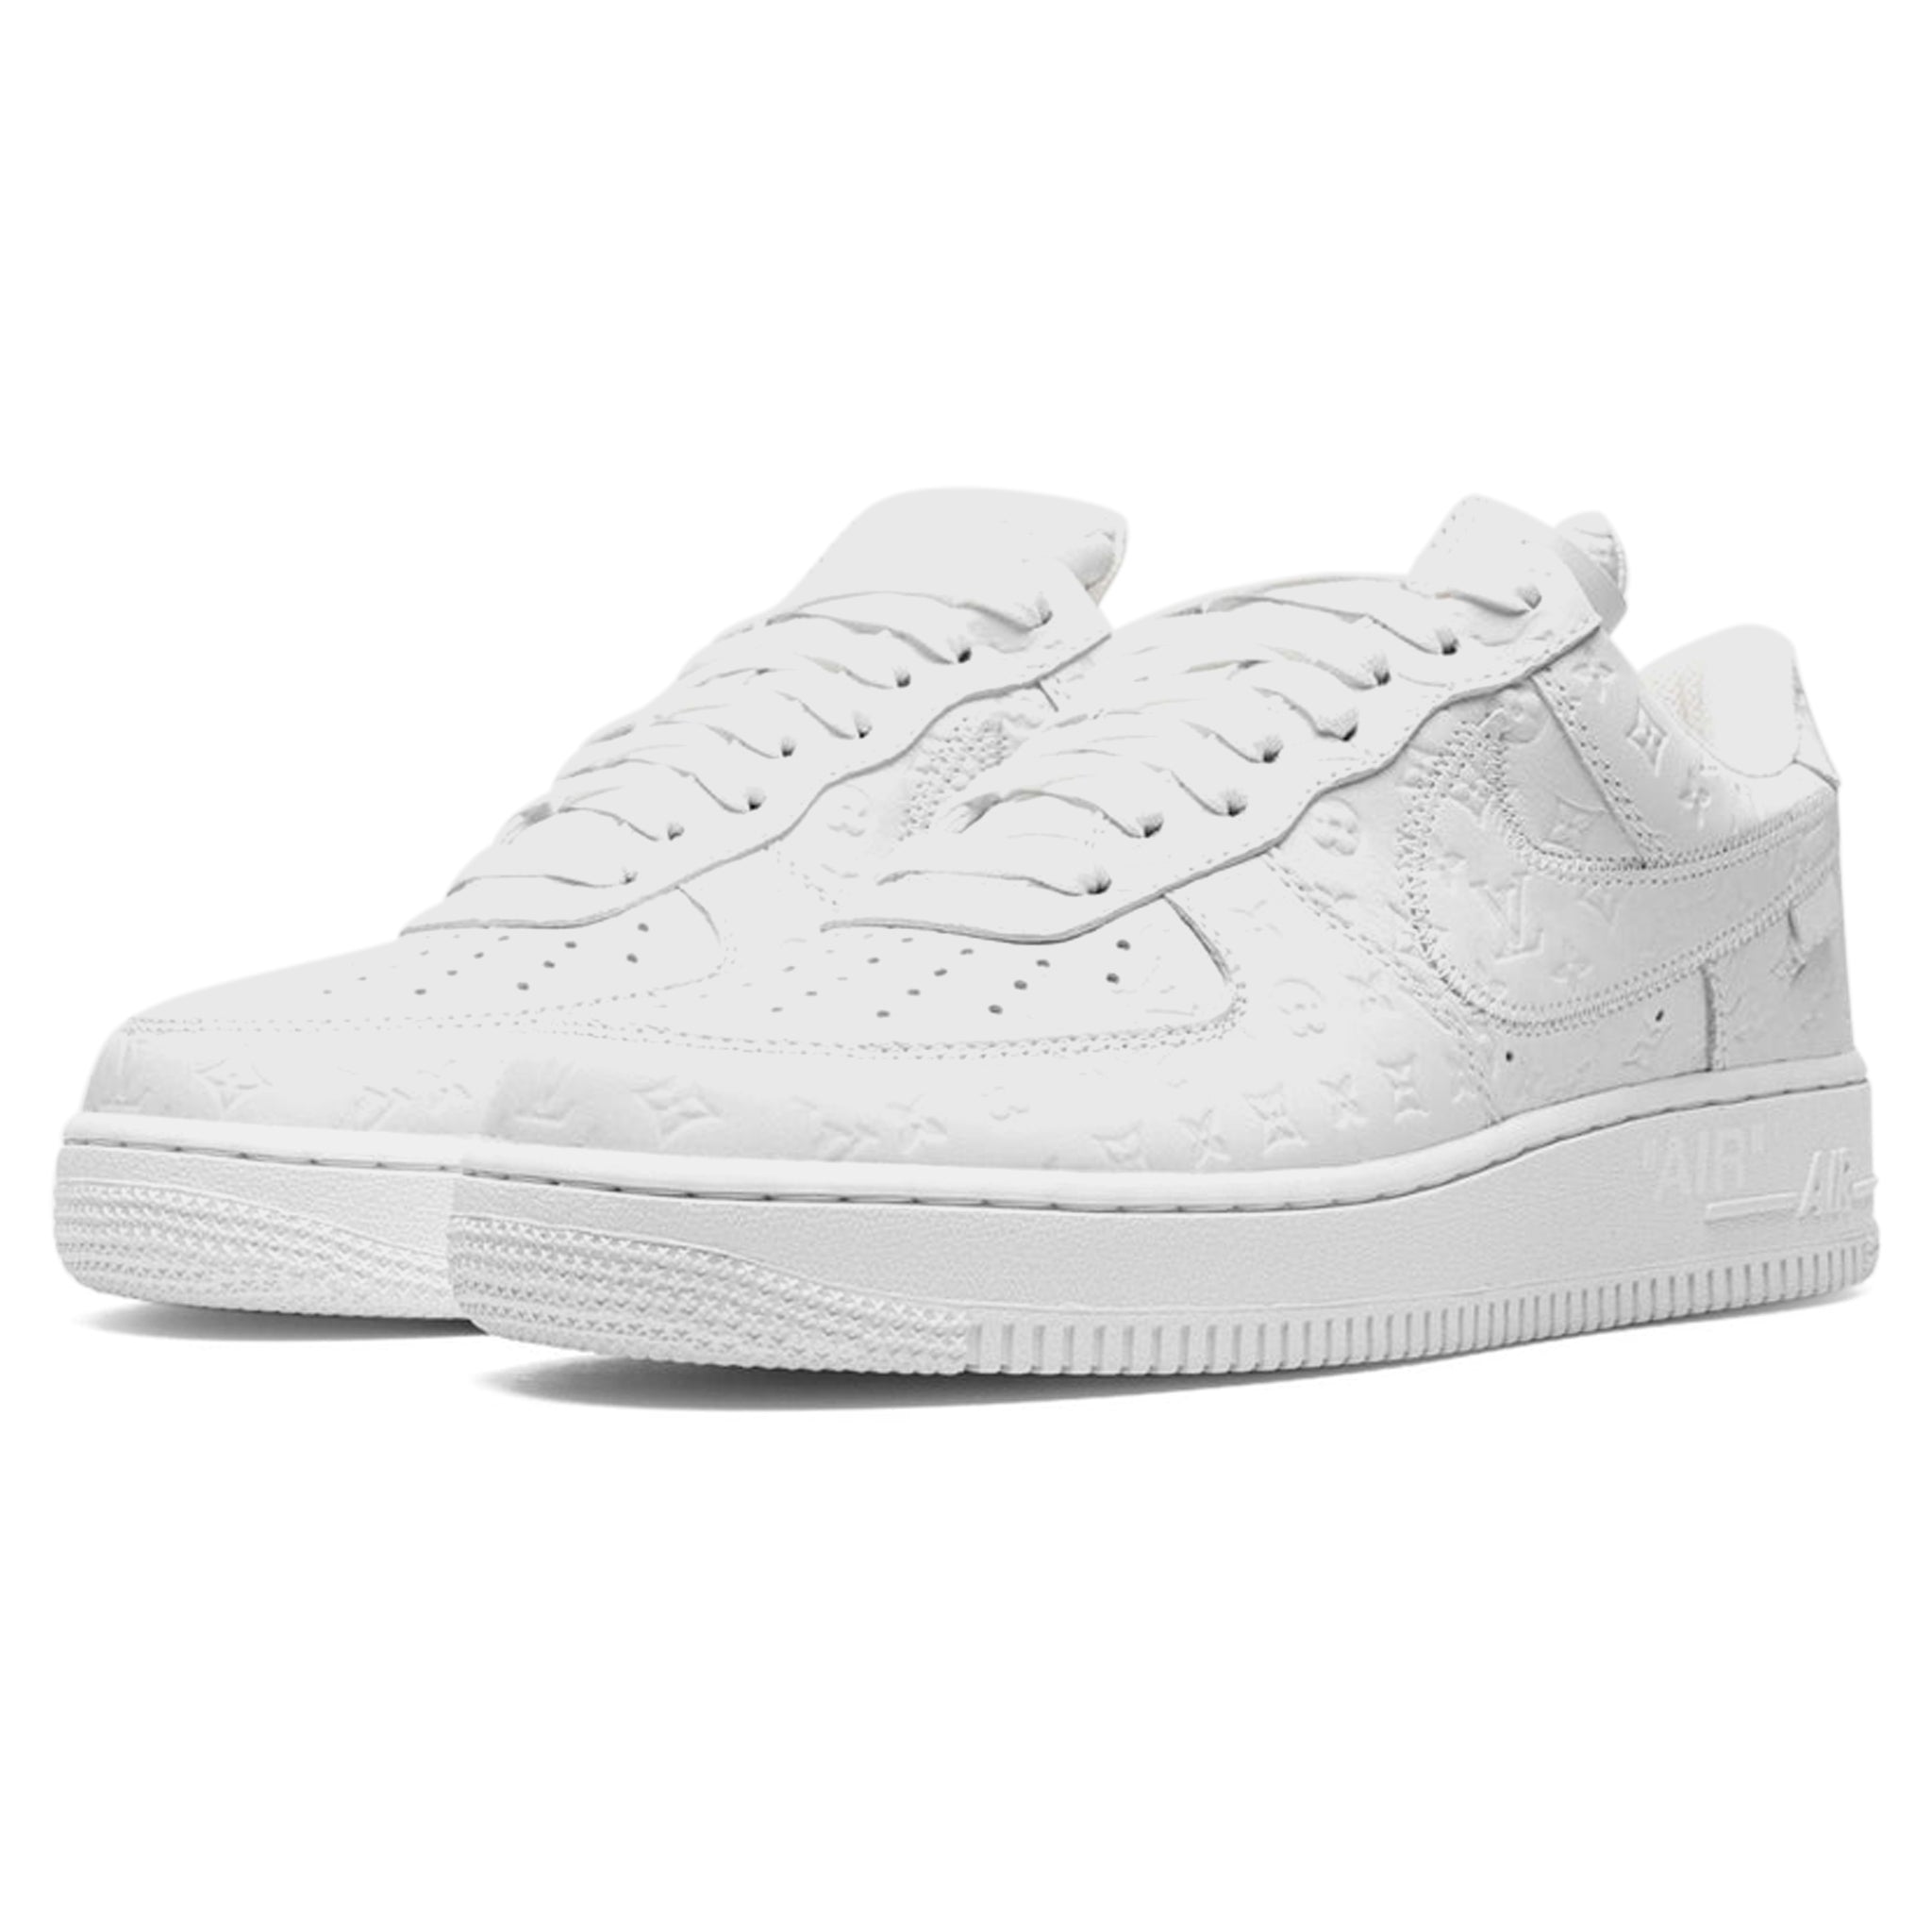 Louis Vuitton Nike Air Force 1 Low By Virgil Abloh White Red Men's